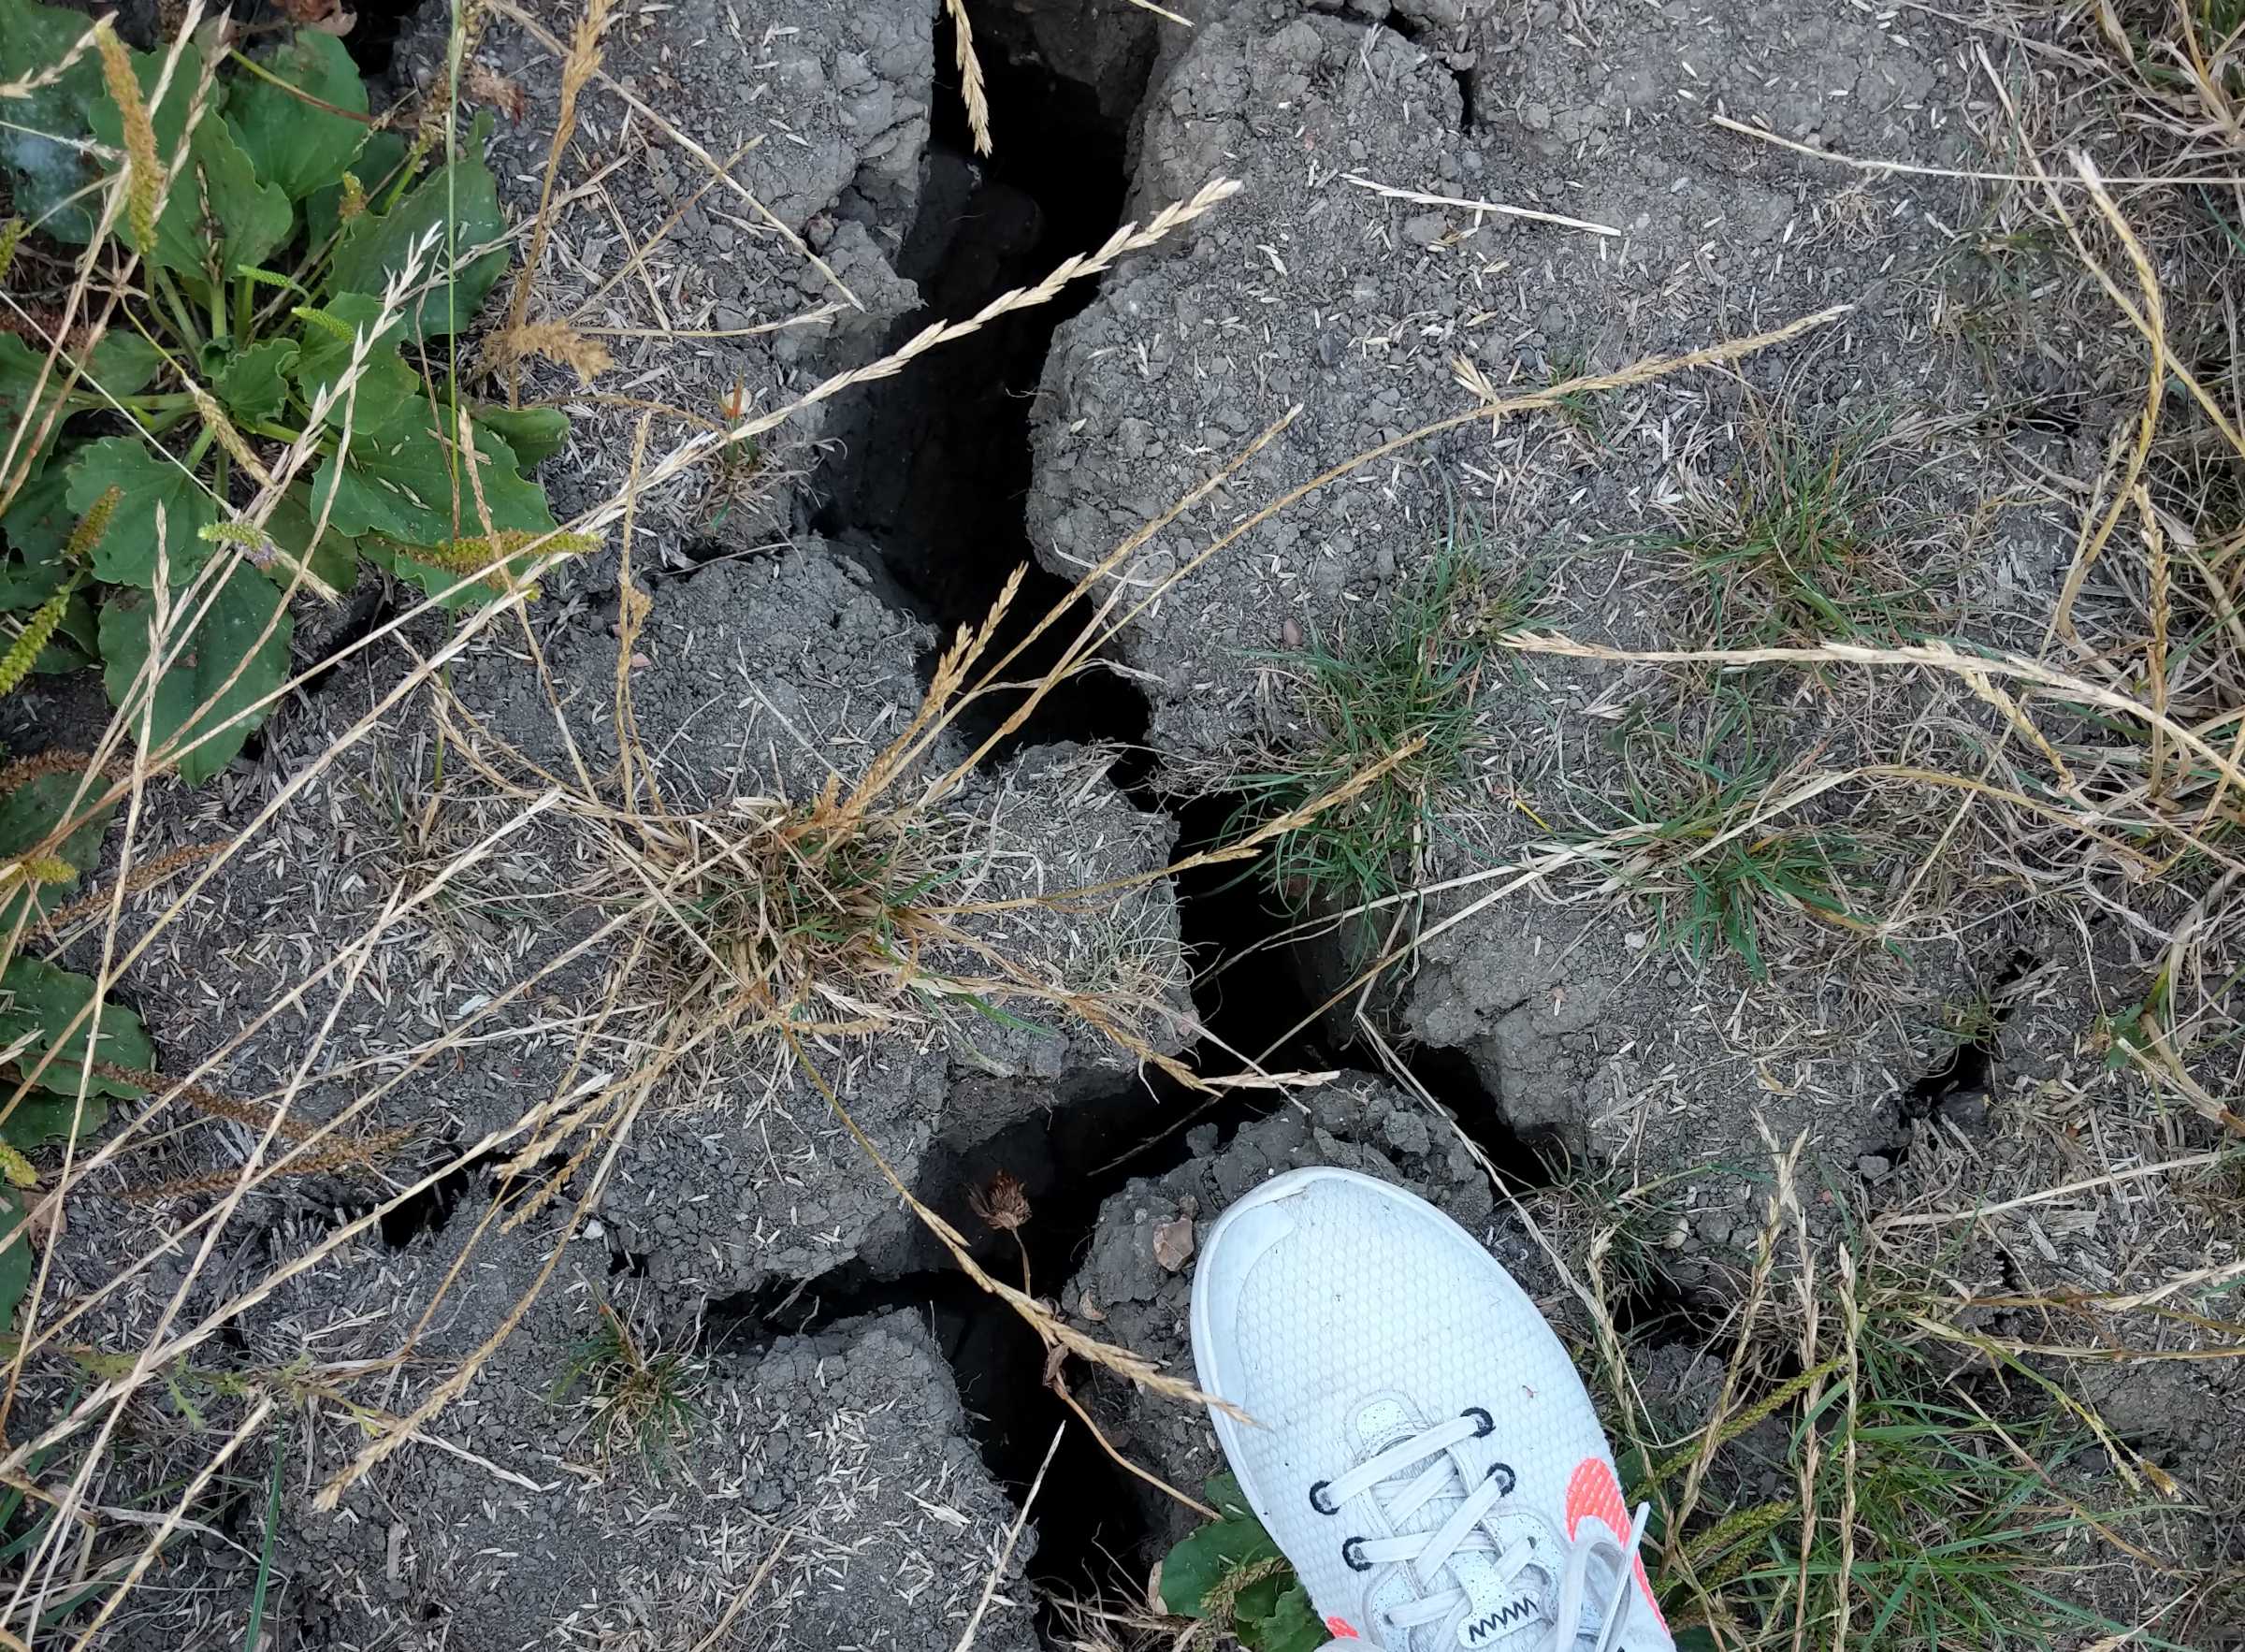 My right foot stands on top
of the earth, next to a deep dark crack that's almost as wide as my foot in
places, and many times as long.